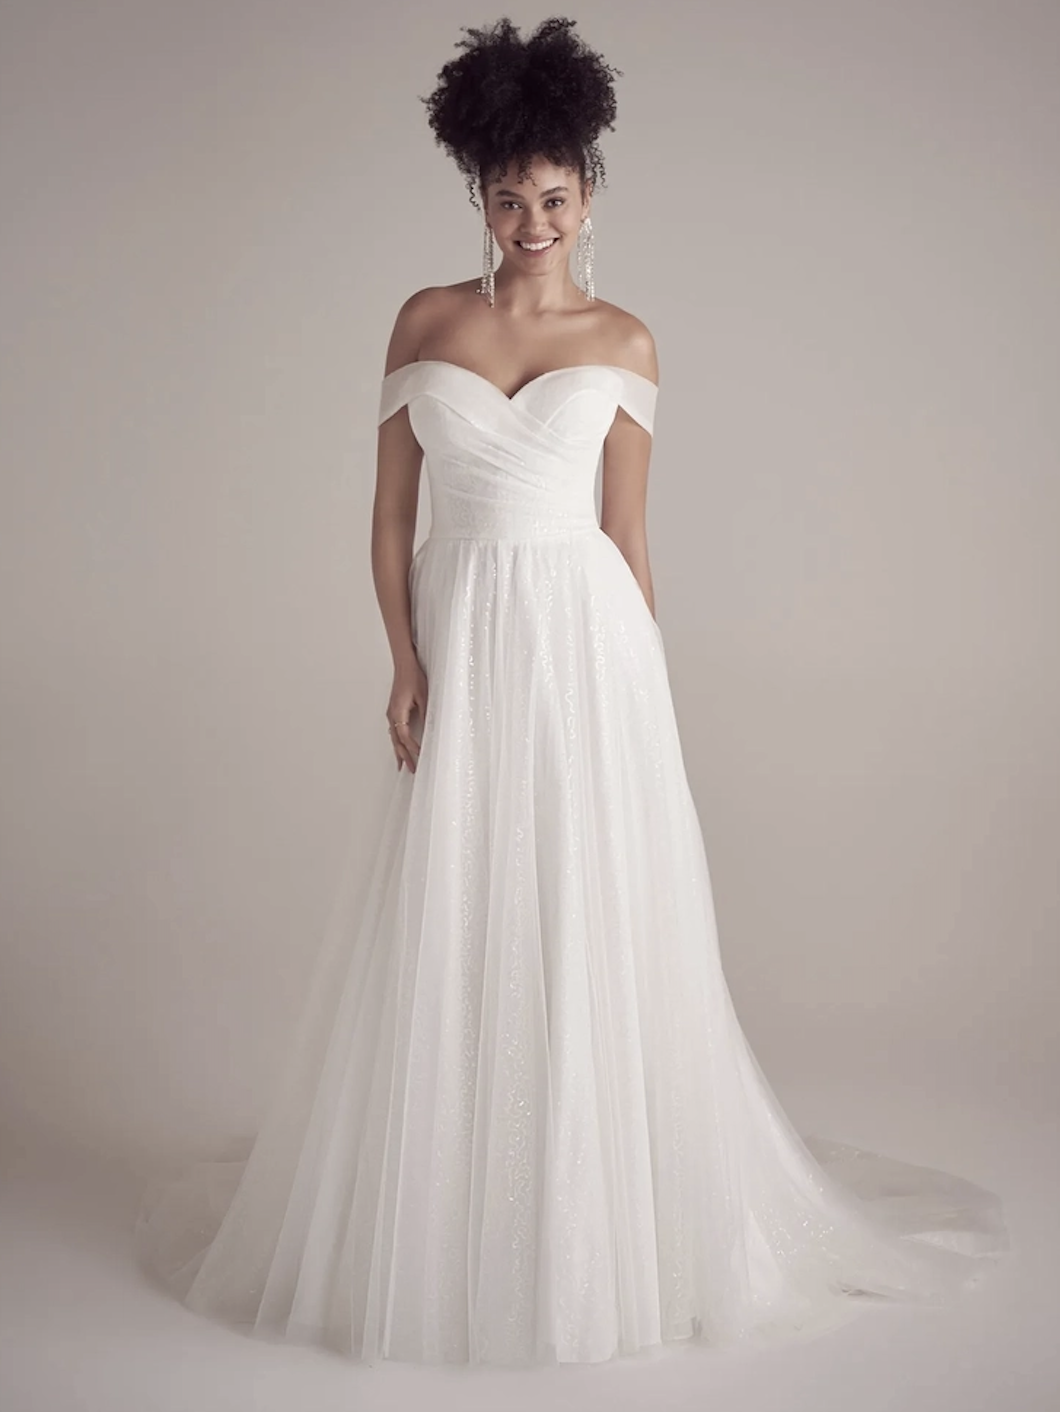 What Does It Mean To Be Ready To Buy Your Wedding Dress? Image